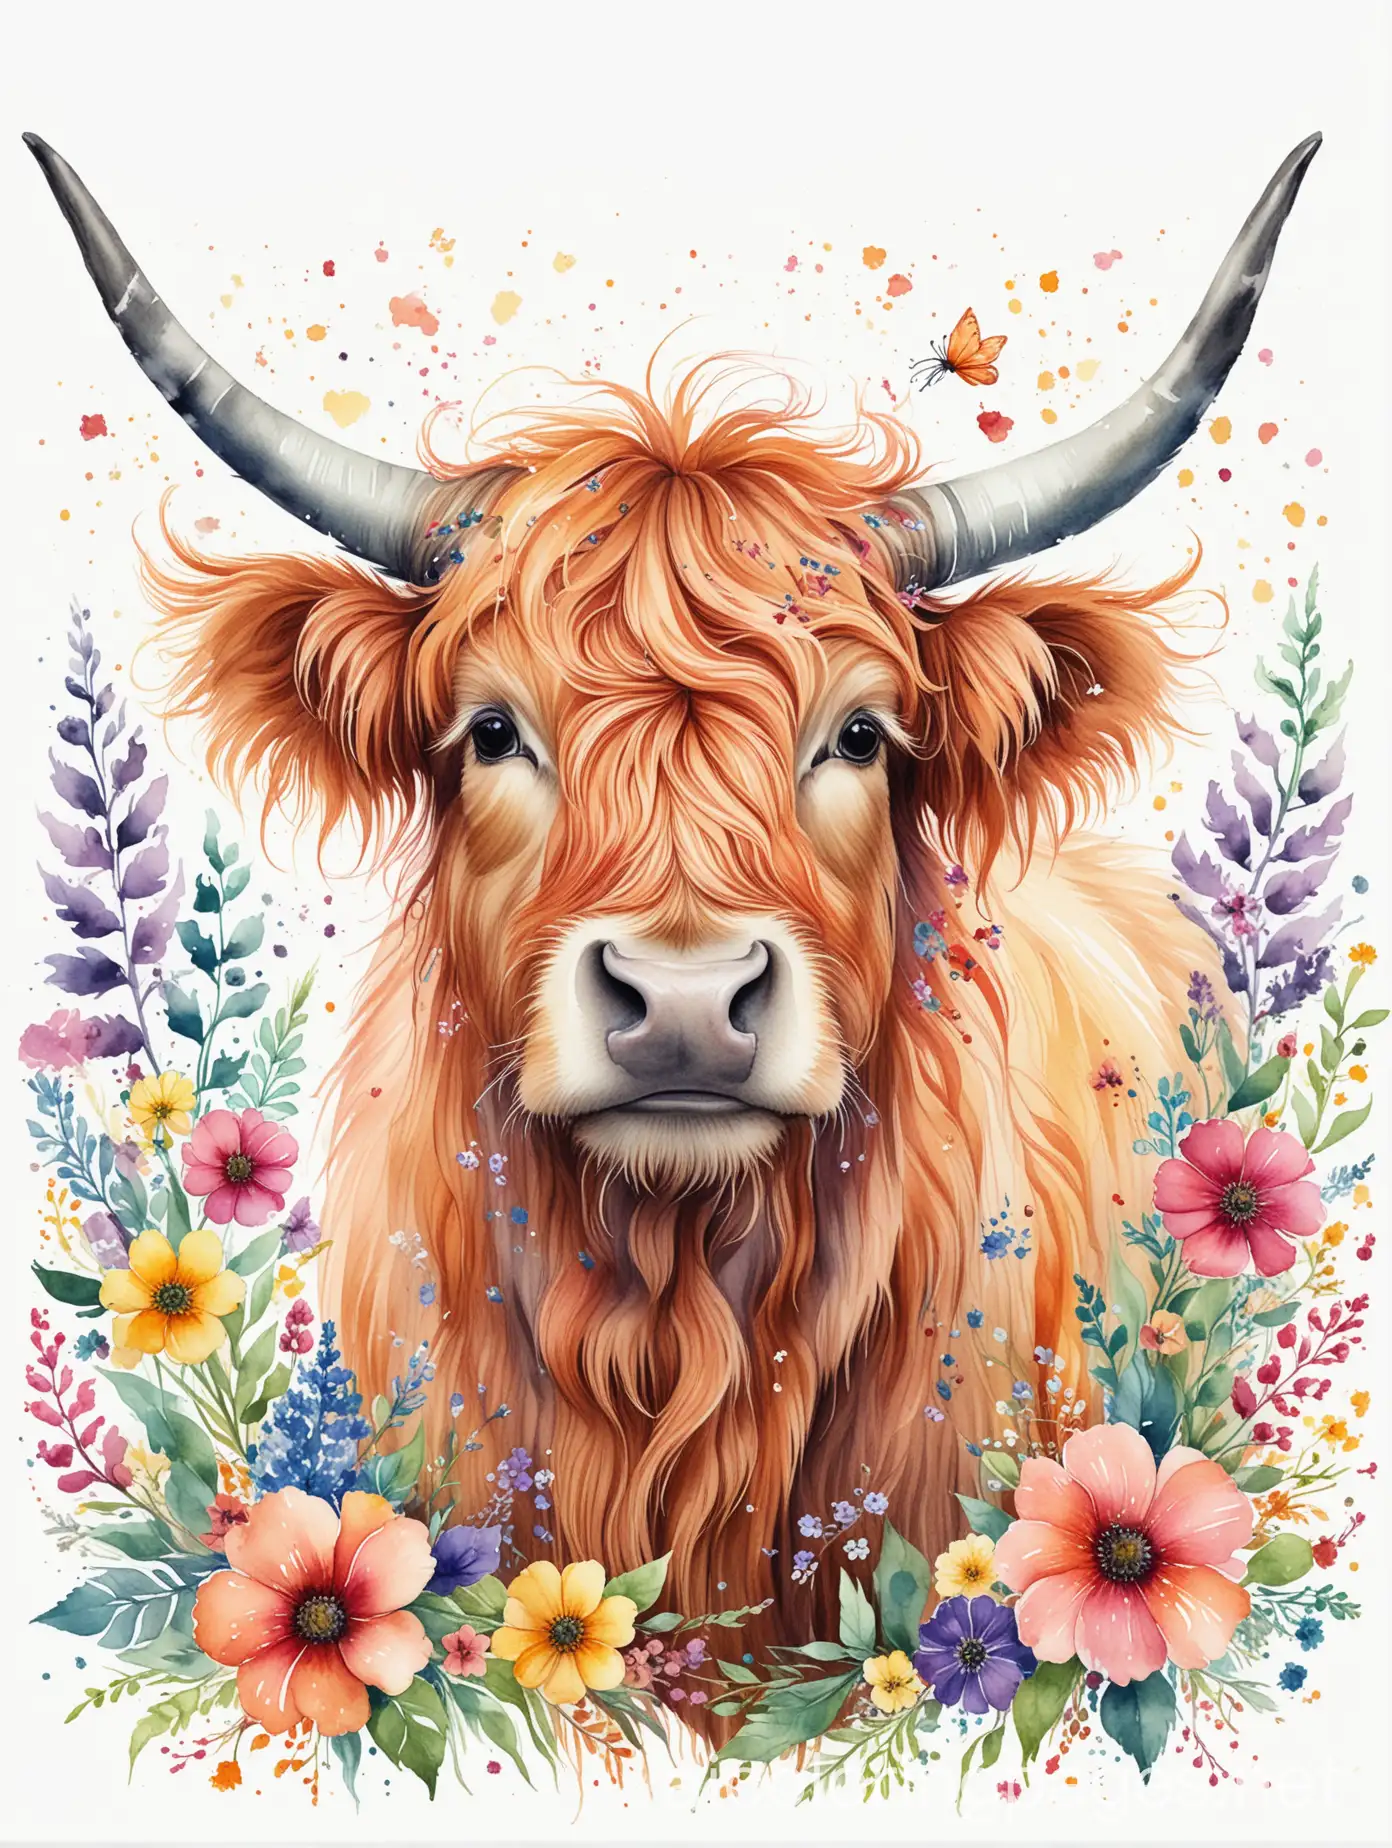 Whimsical-Highland-Cow-Illustration-with-Vibrant-Watercolor-Florals-Springtime-Joy-Artful-Graphic-Design-Coloring-Page